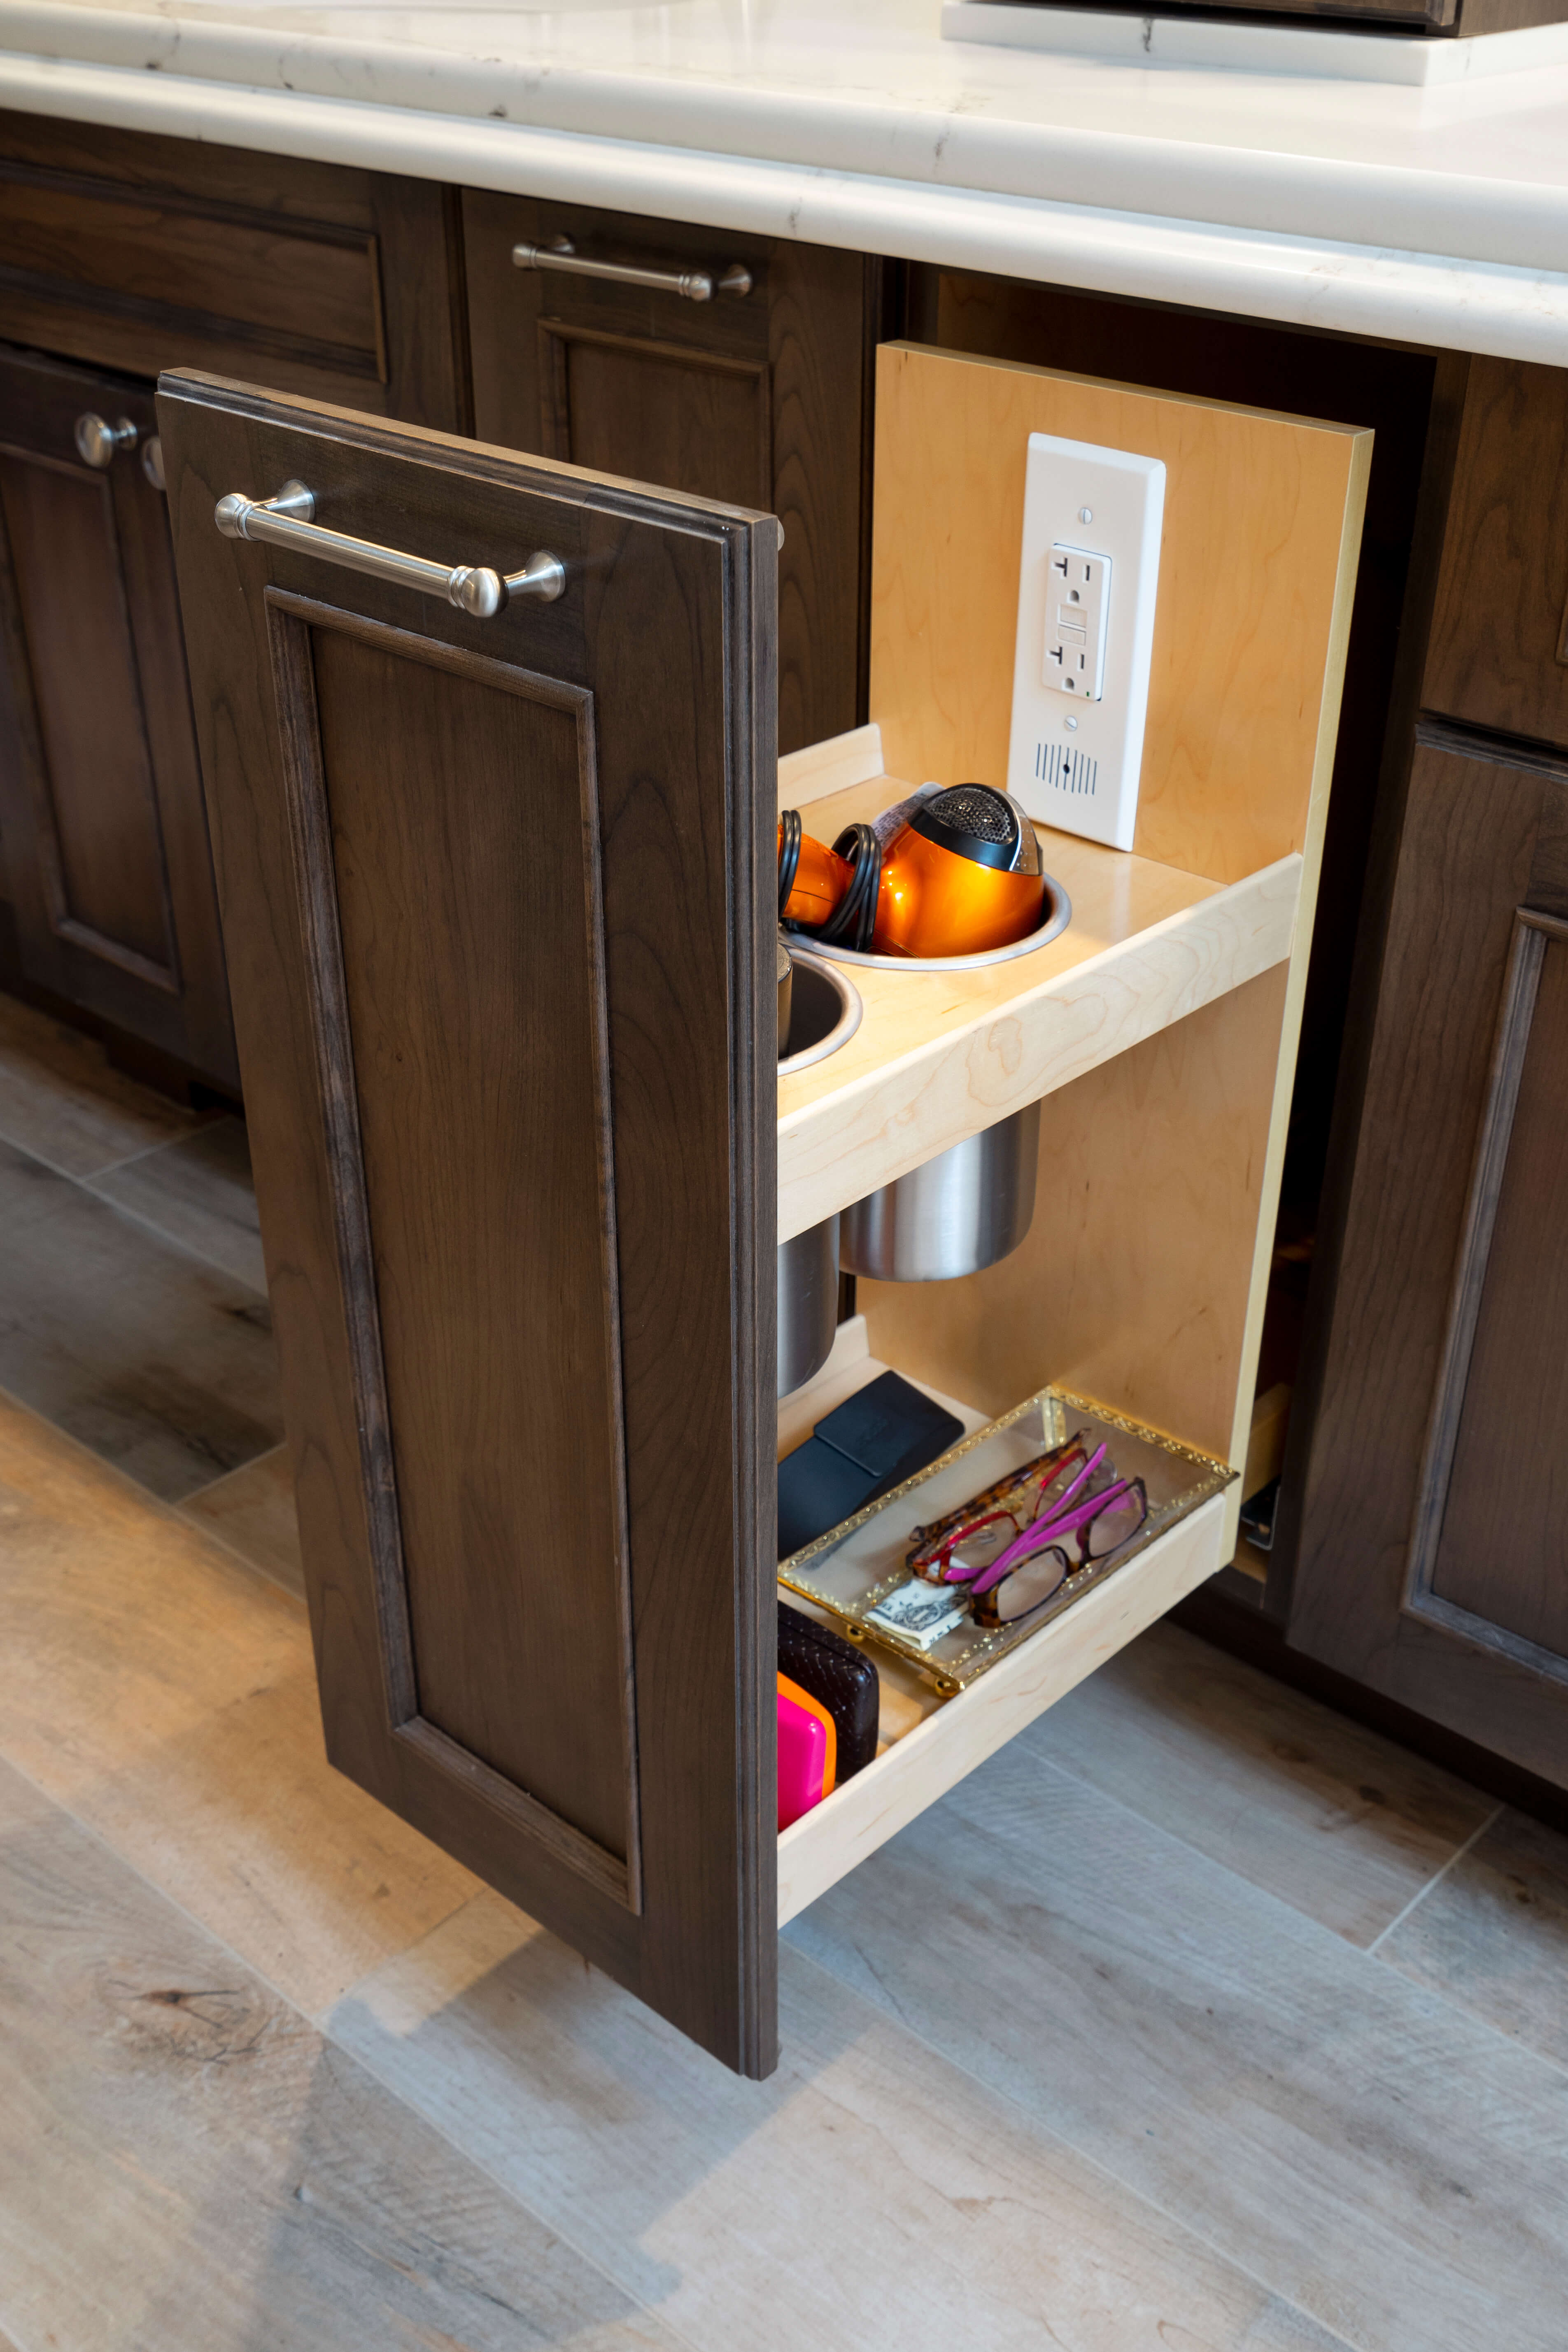 A bathroom vanity pull-out cabinet with an outlet for hairdriers, curling irons, and more.